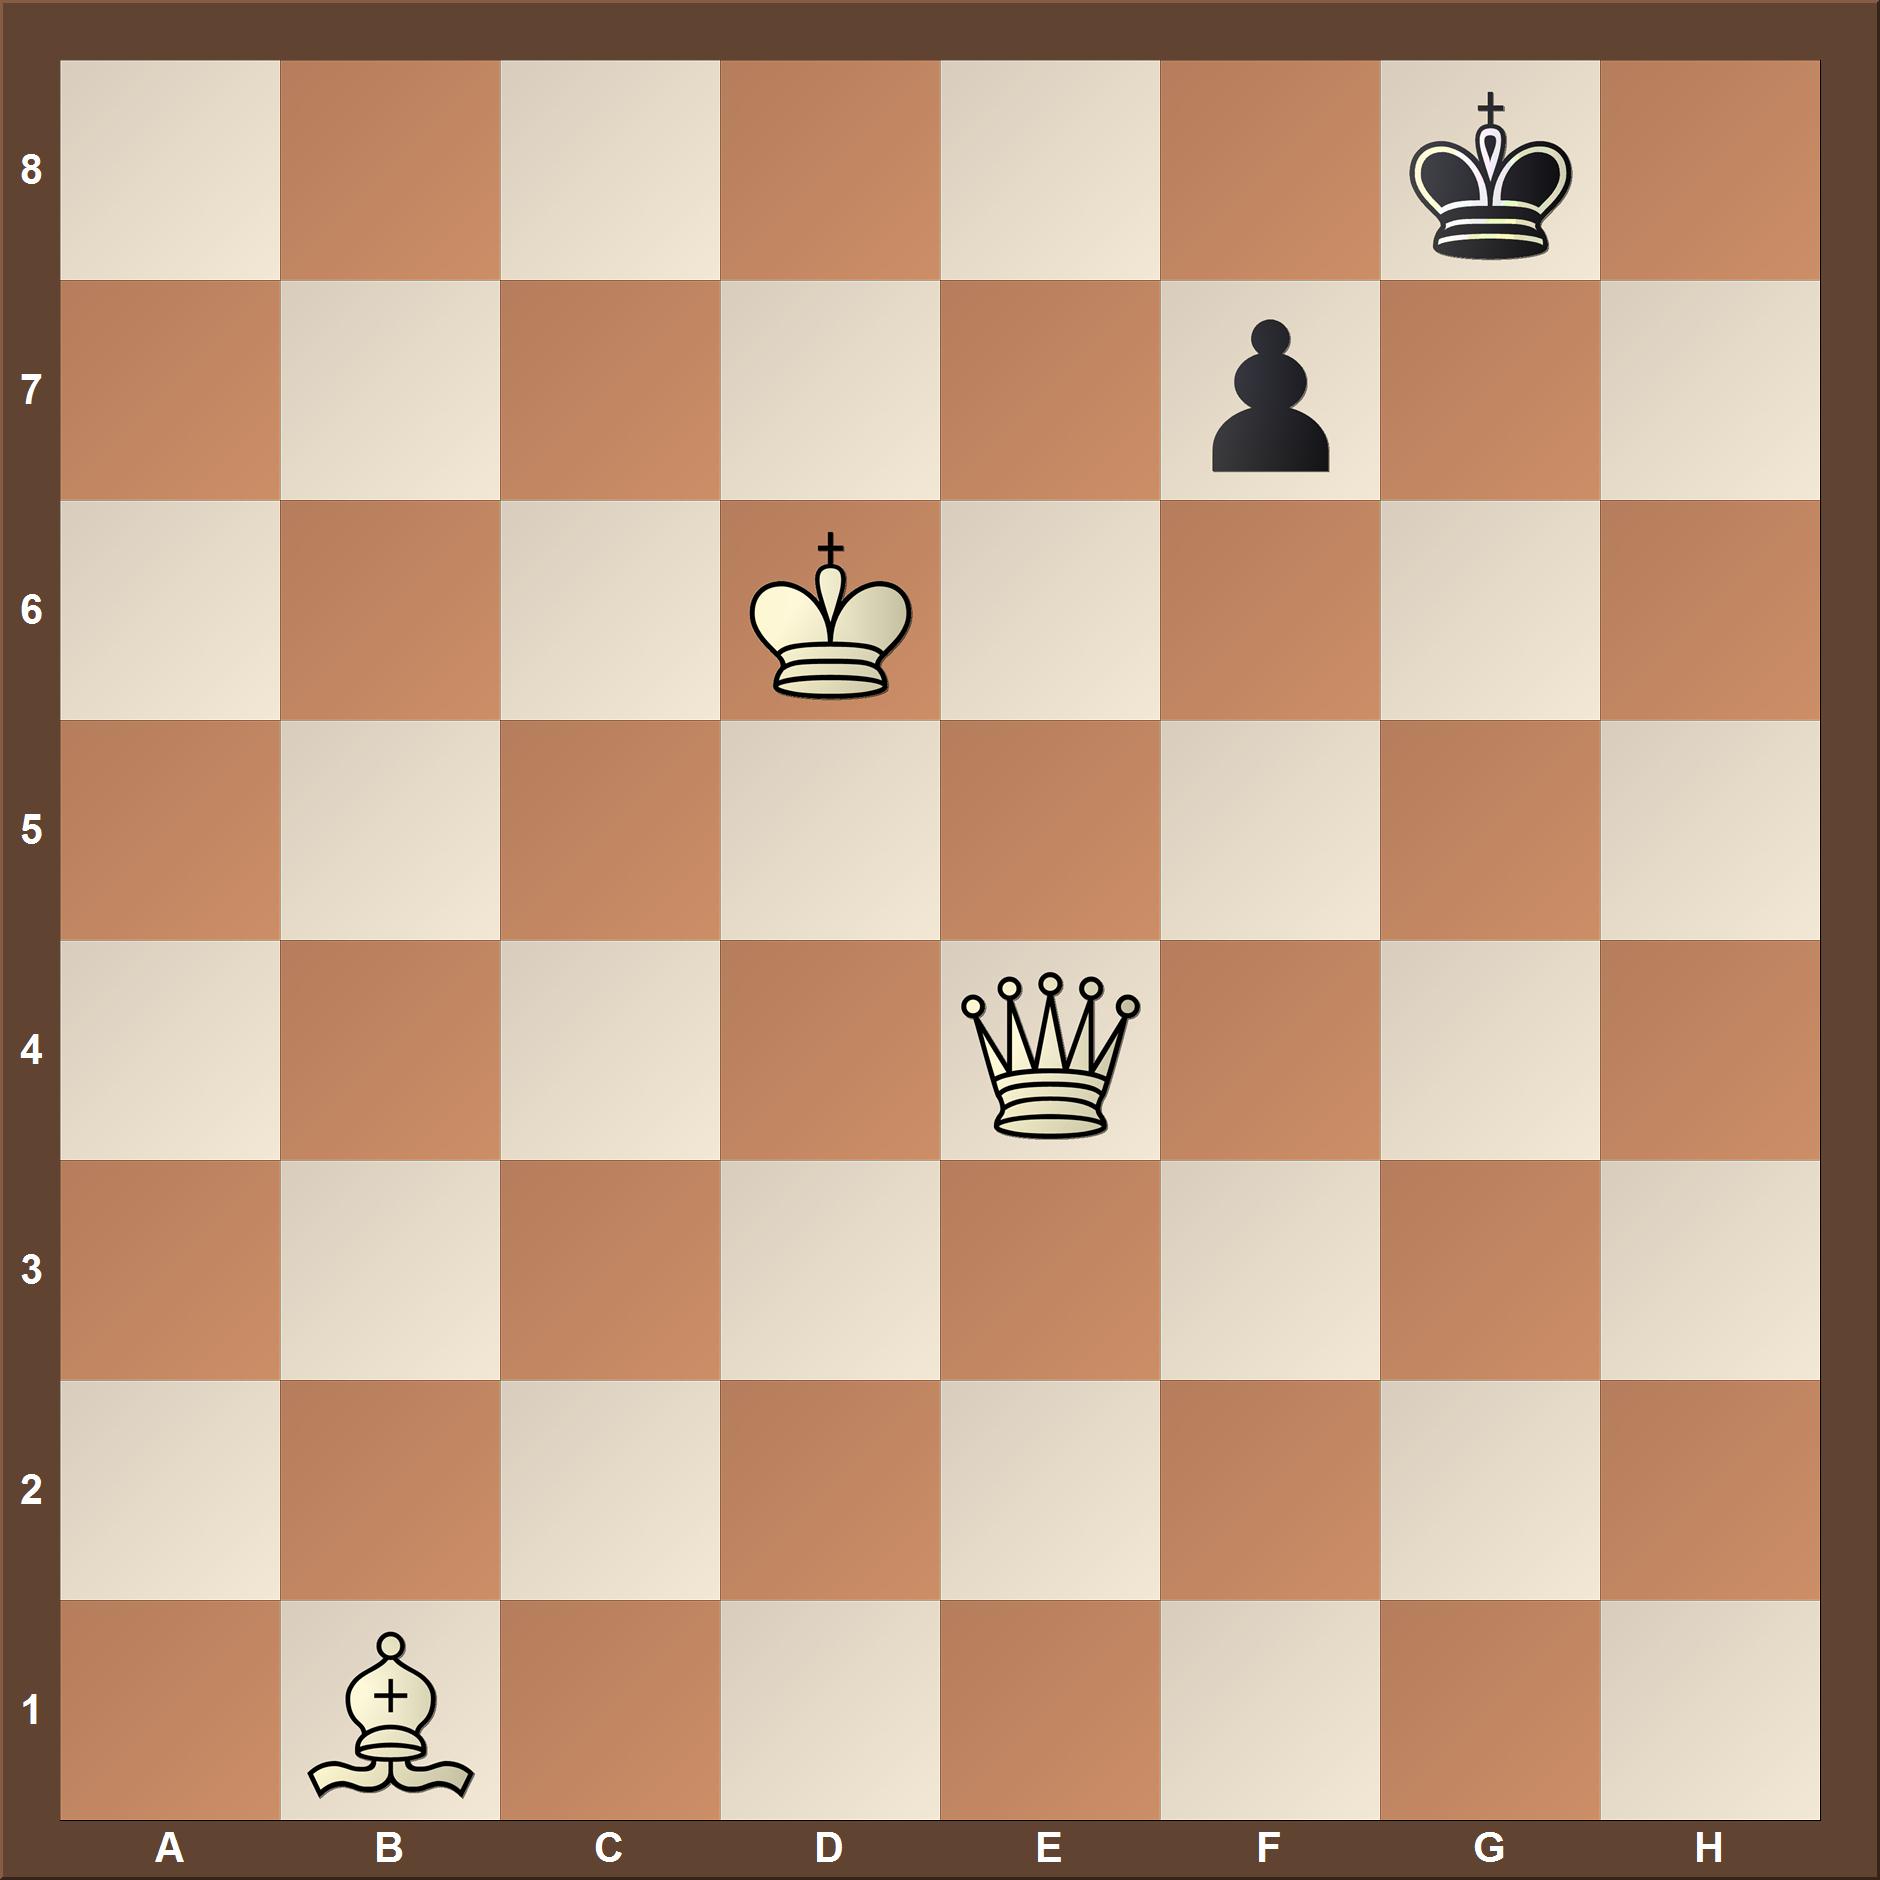 Checkmate in two move